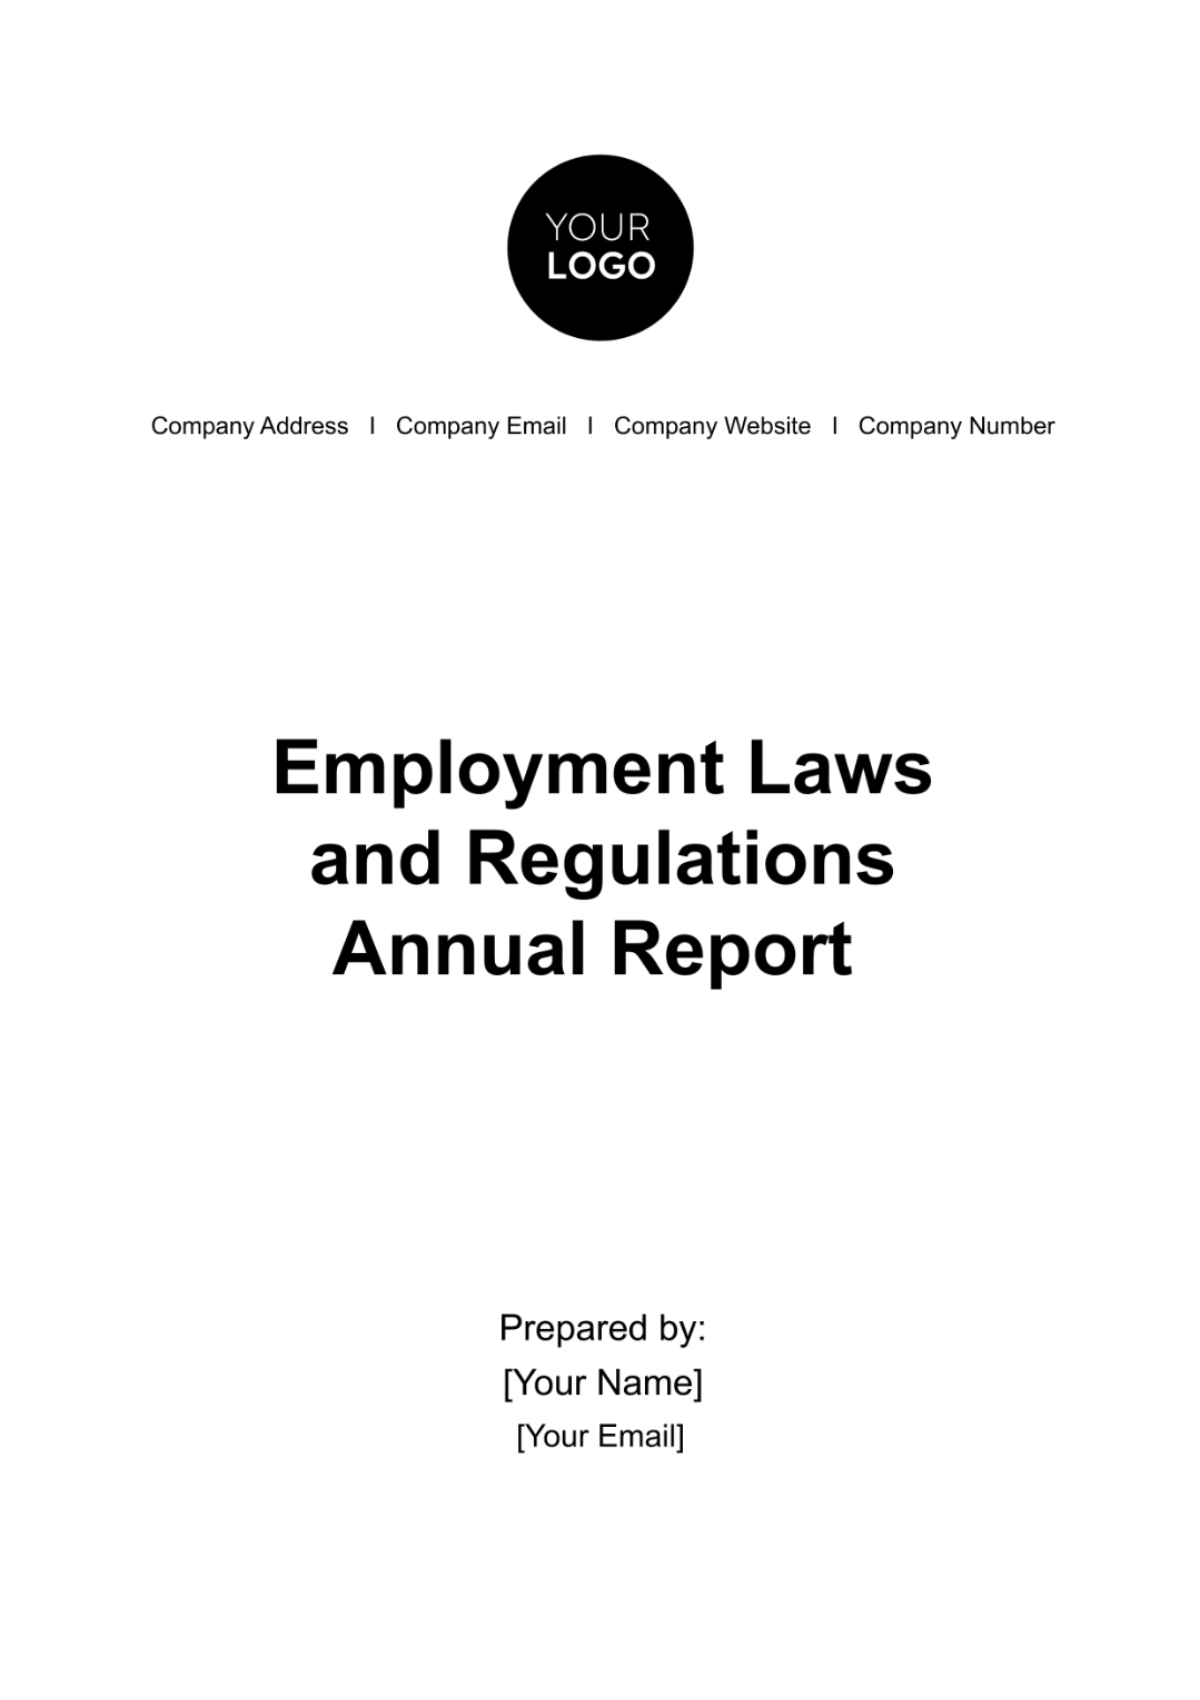 Free Employment Laws and Regulations Annual Report HR Template